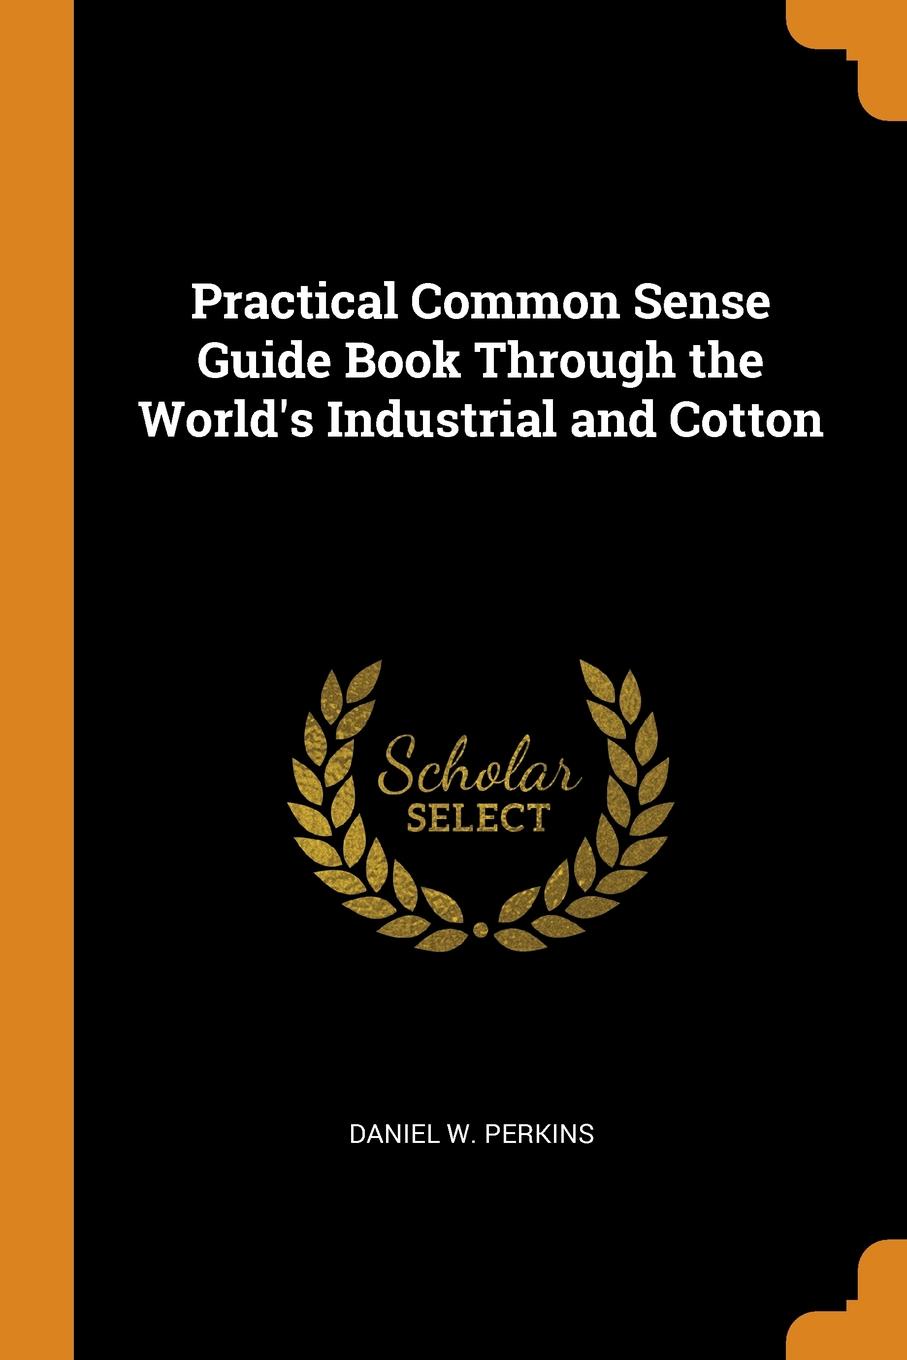 фото Practical Common Sense Guide Book Through the World.s Industrial and Cotton